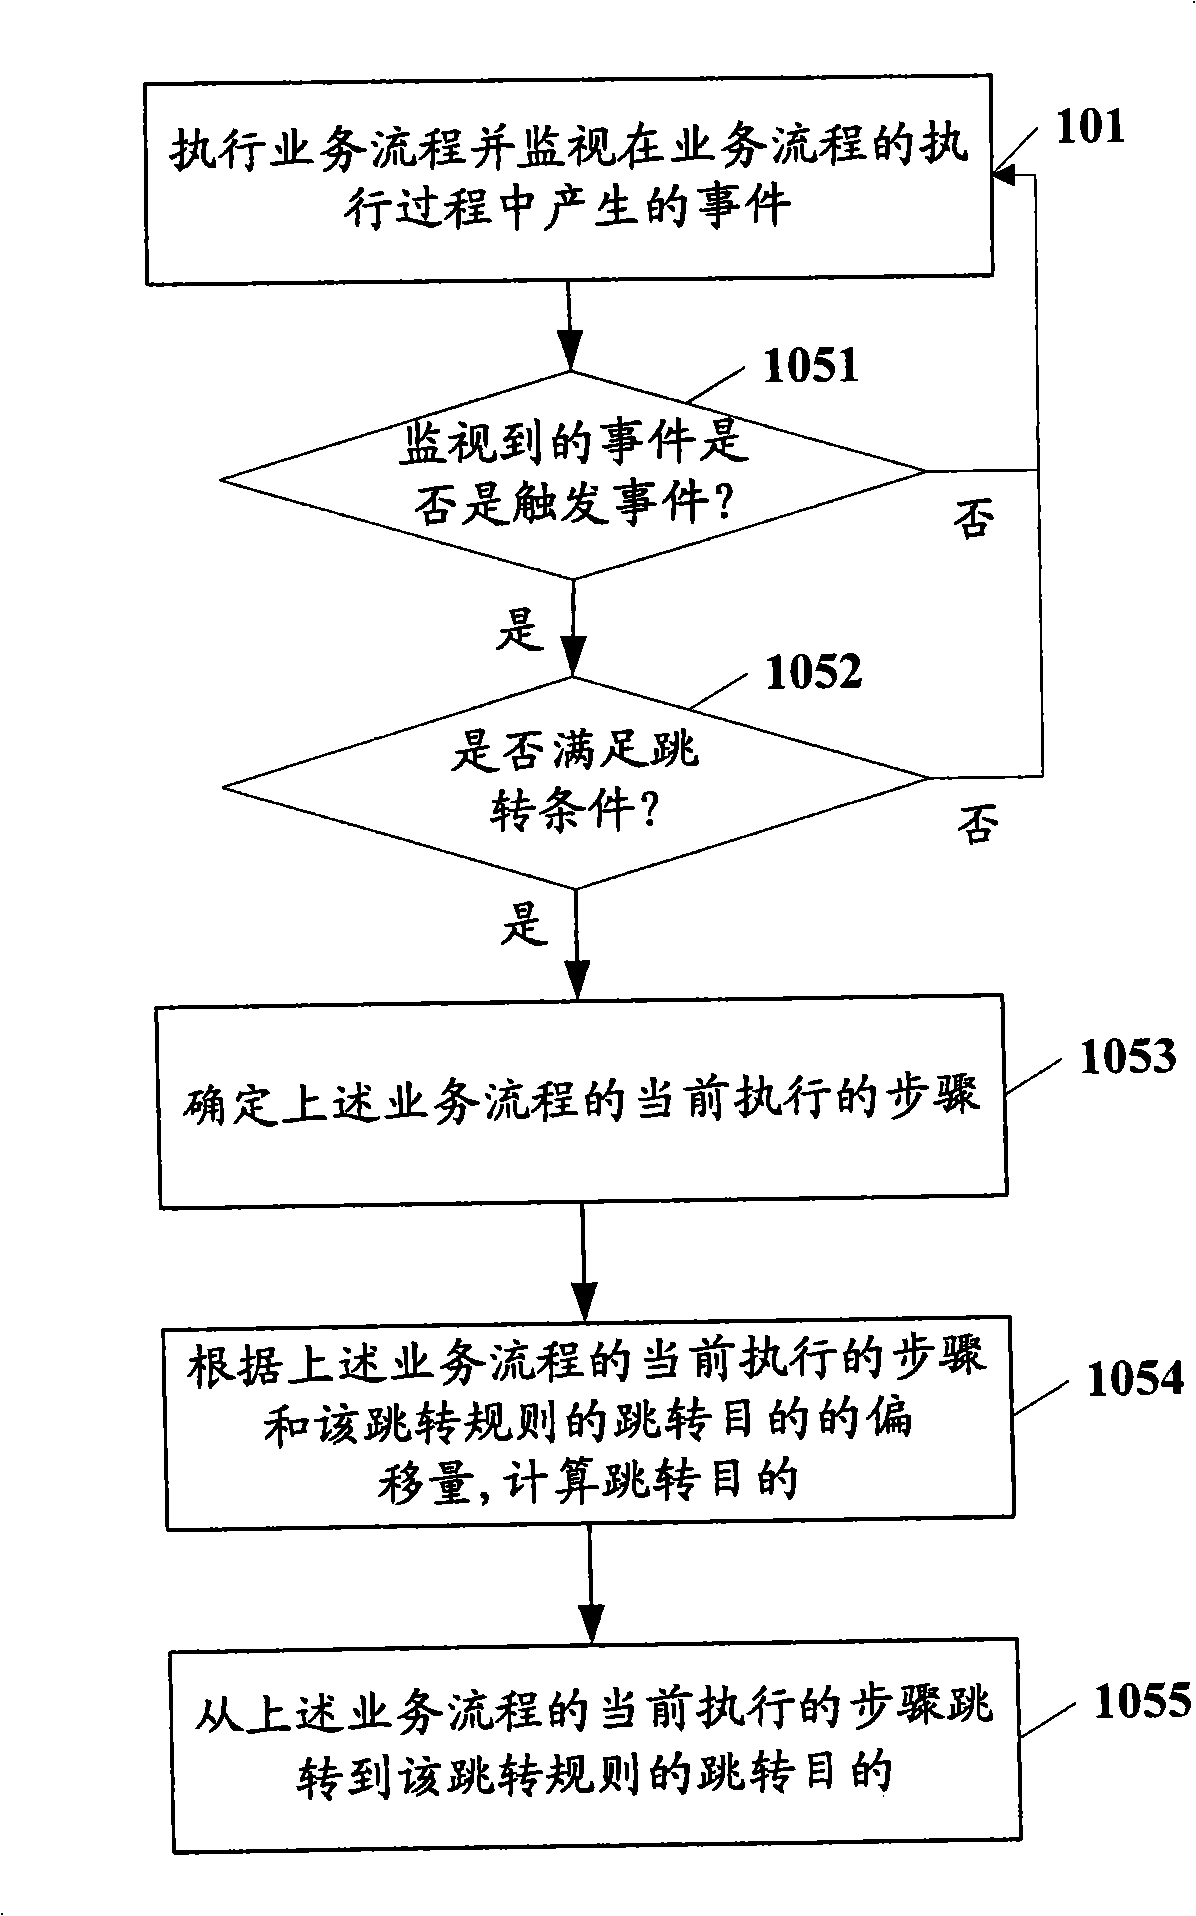 Business flow path execution method, business flow path engines and its deployment method